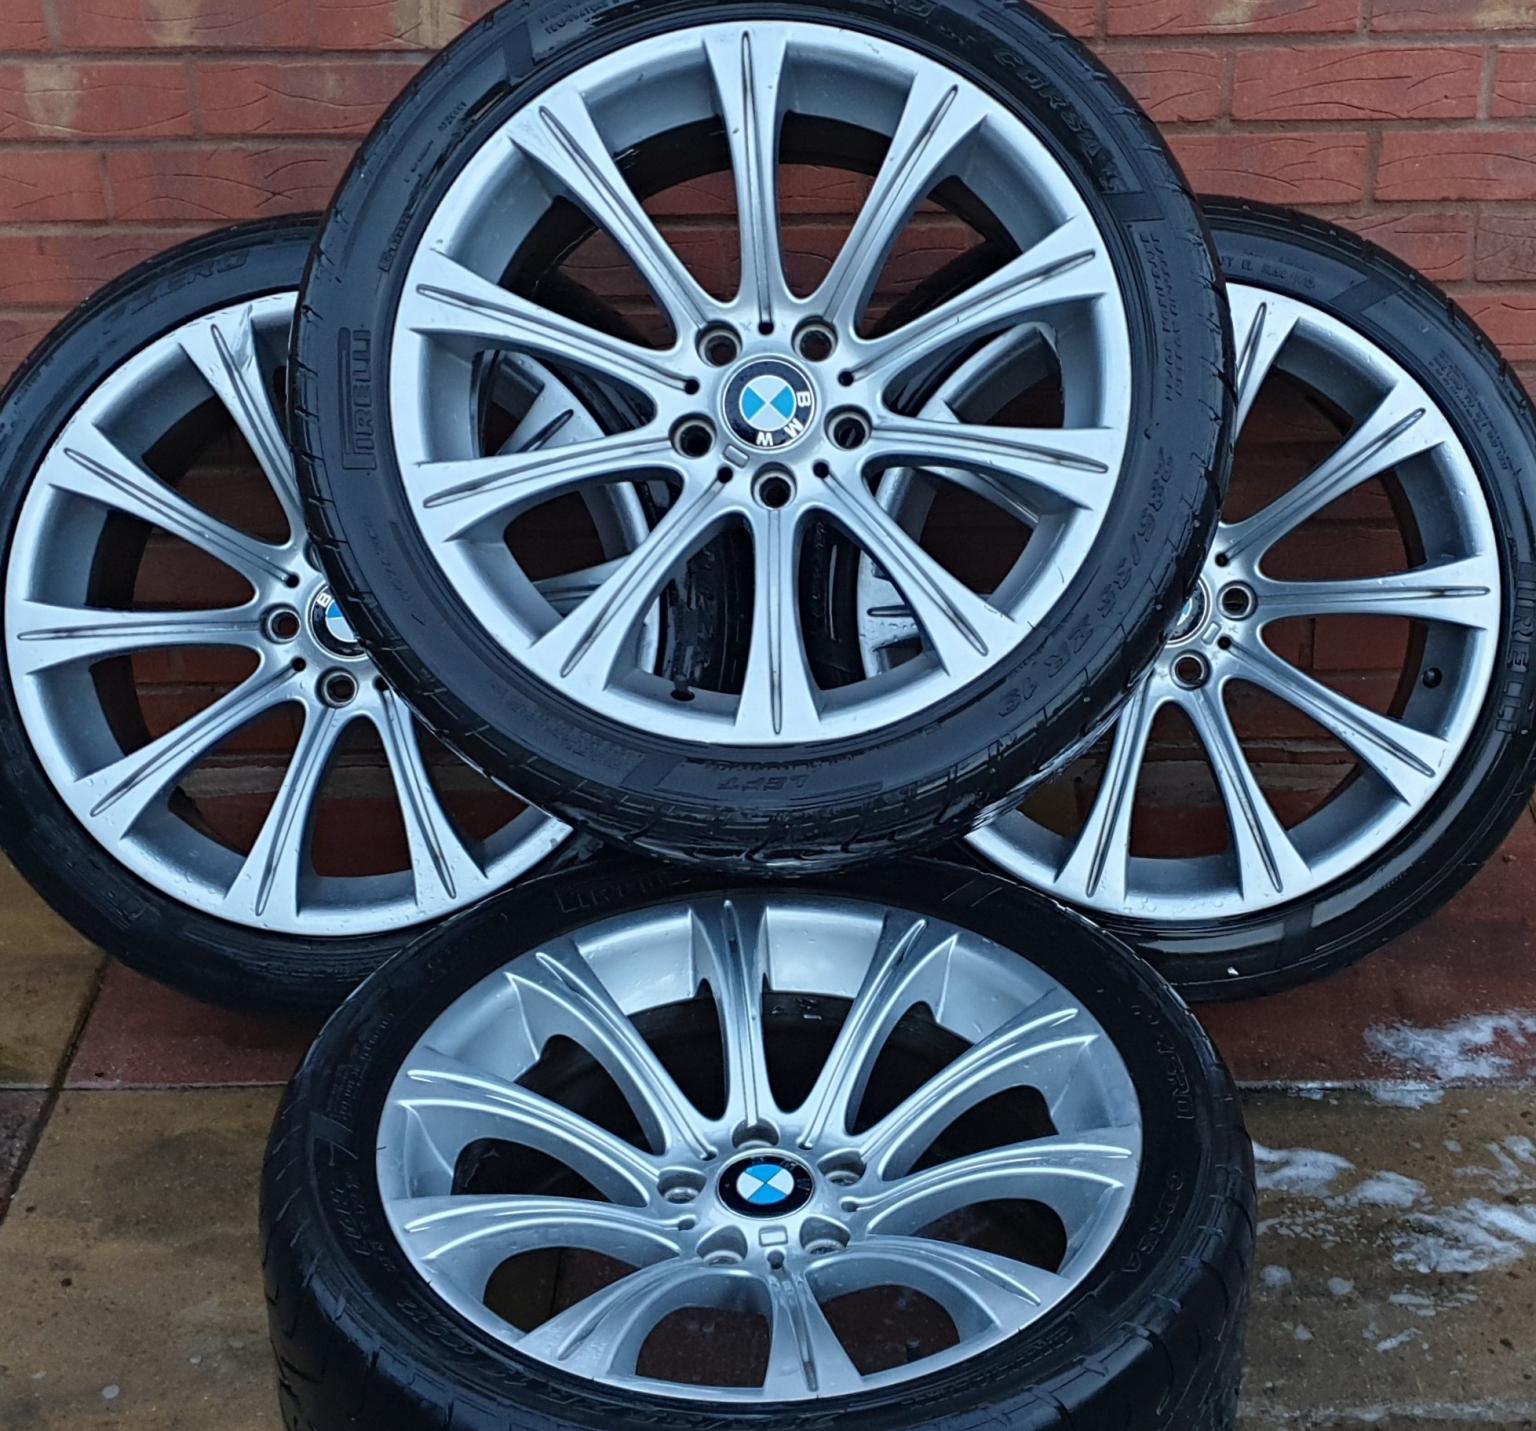 Rectangle Round Shuraba BMW 5 Series M5 E60 19" alloy wheels - Genuin in B27 Birmingham for £650.00  for sale | Shpock